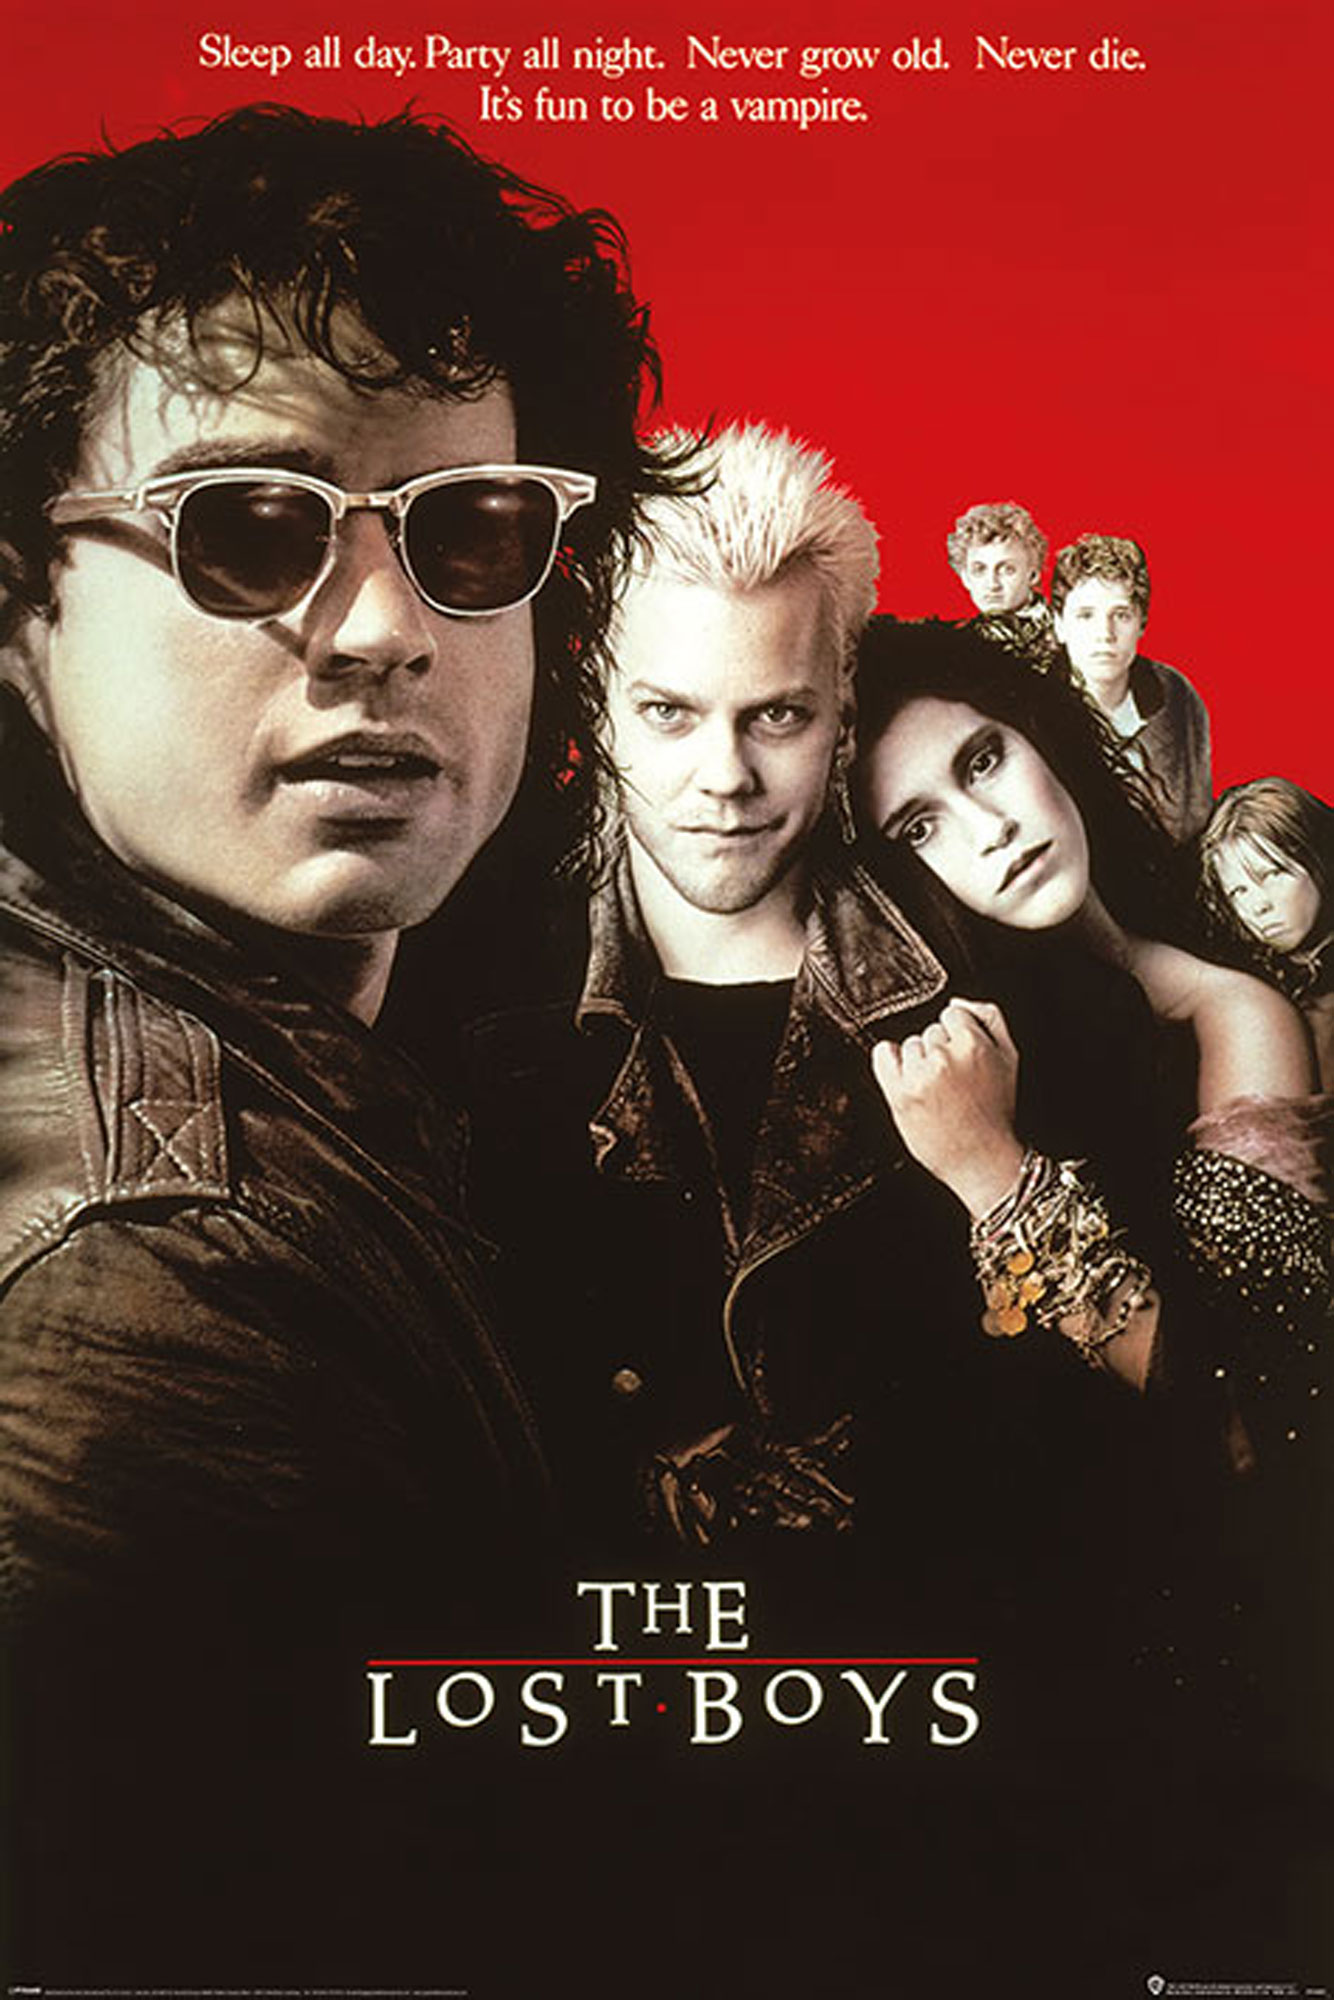 Lost Boys, The - Cult Classic